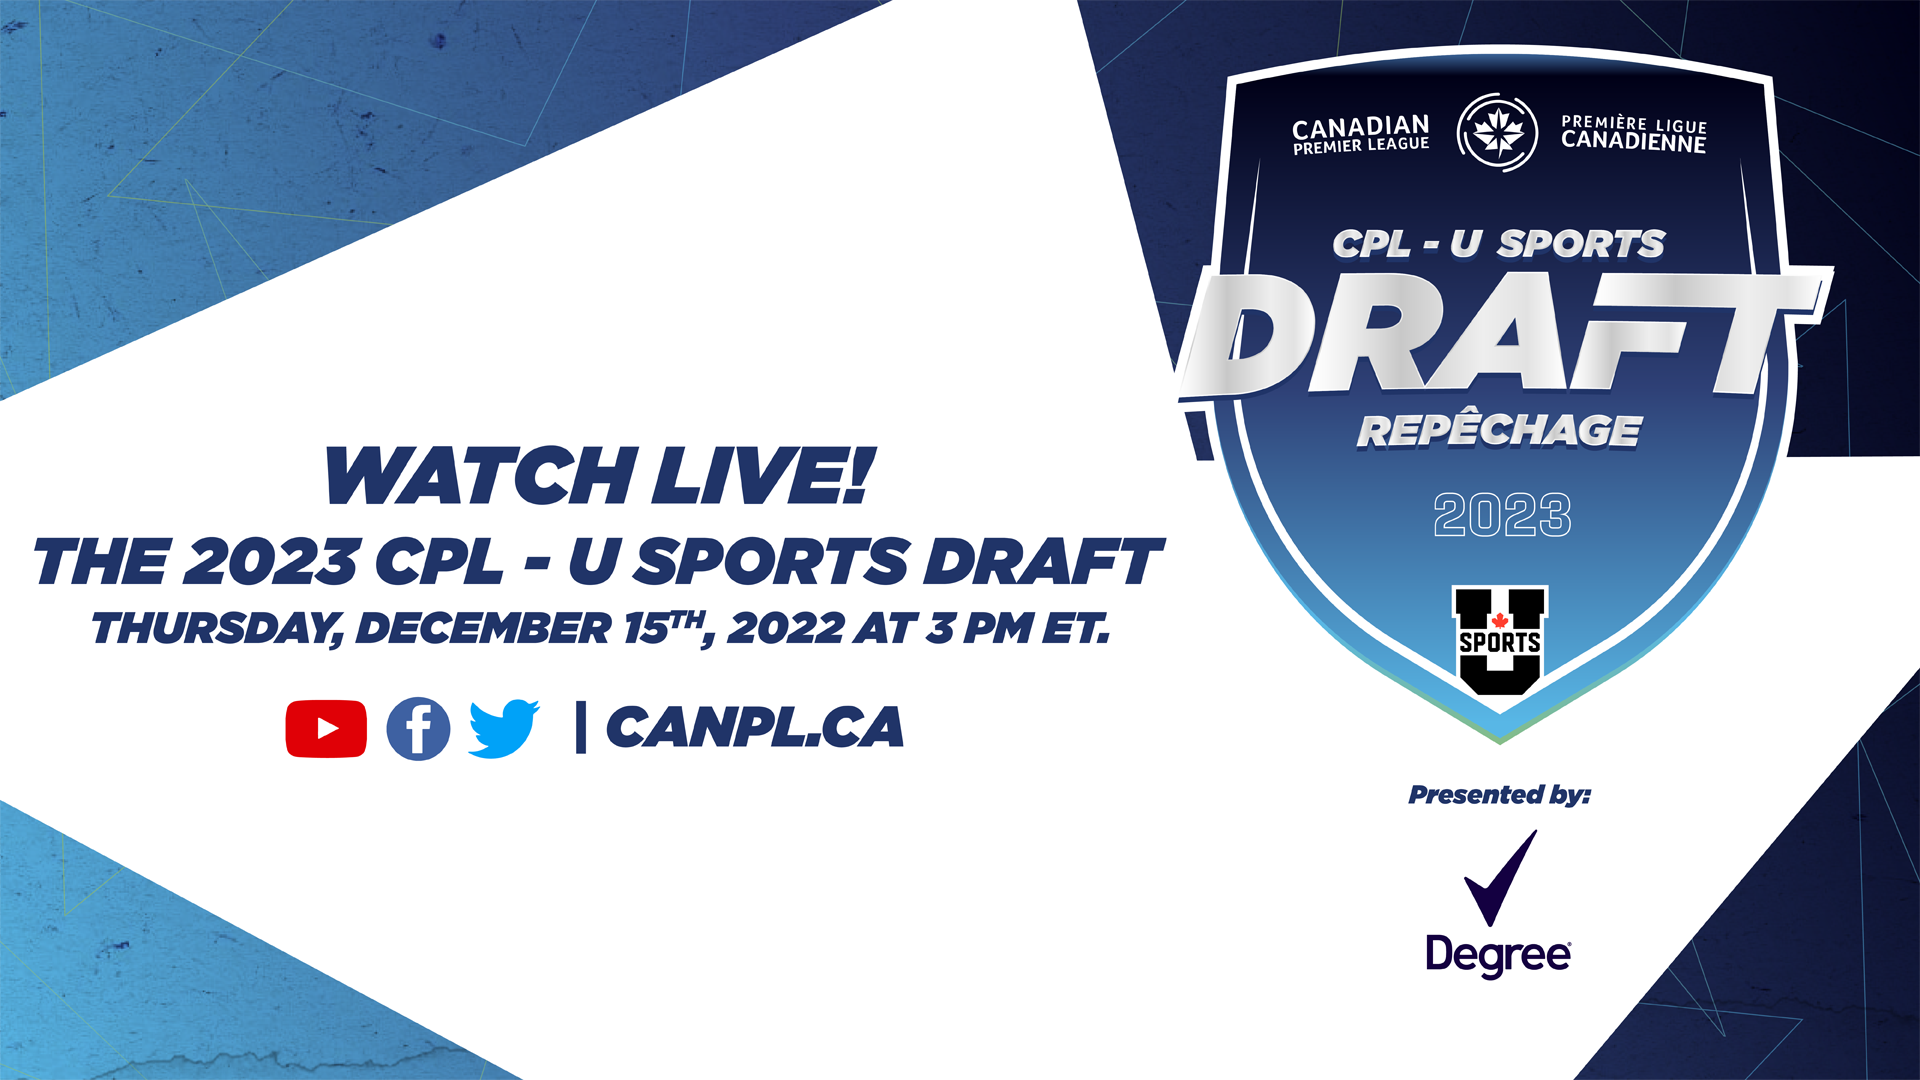 Canadian Premier League announces 2023 CPL-U SPORTS Draft, presented by Degree